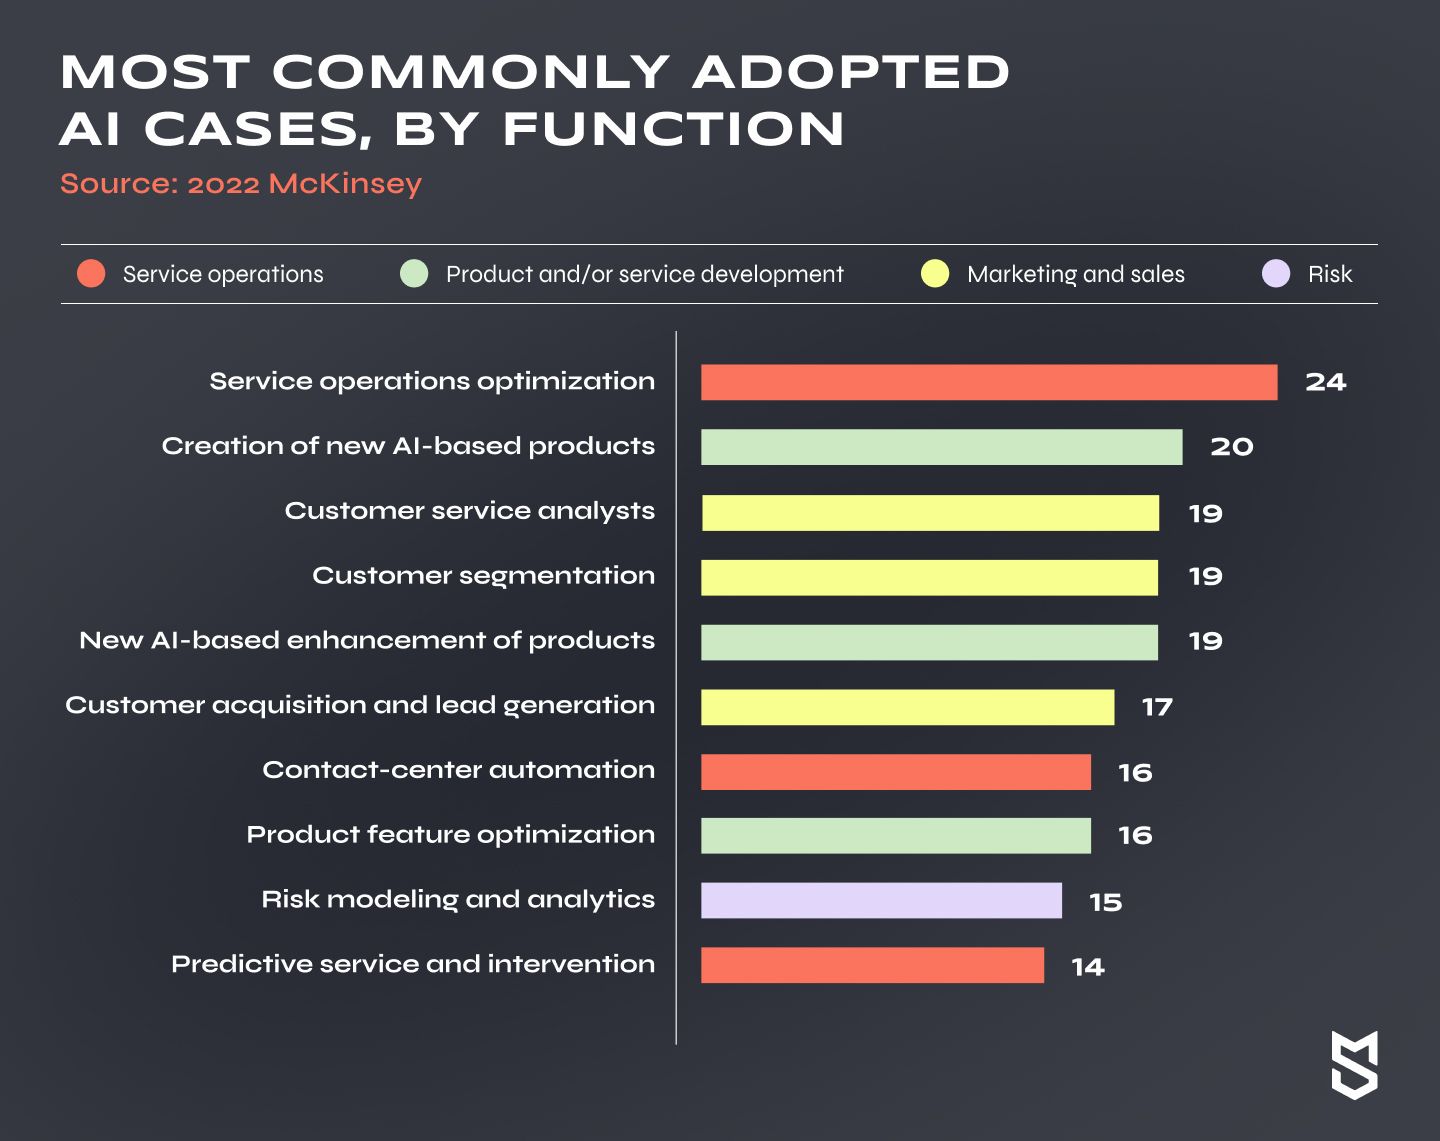 Most commonly adopted AI cases, by function